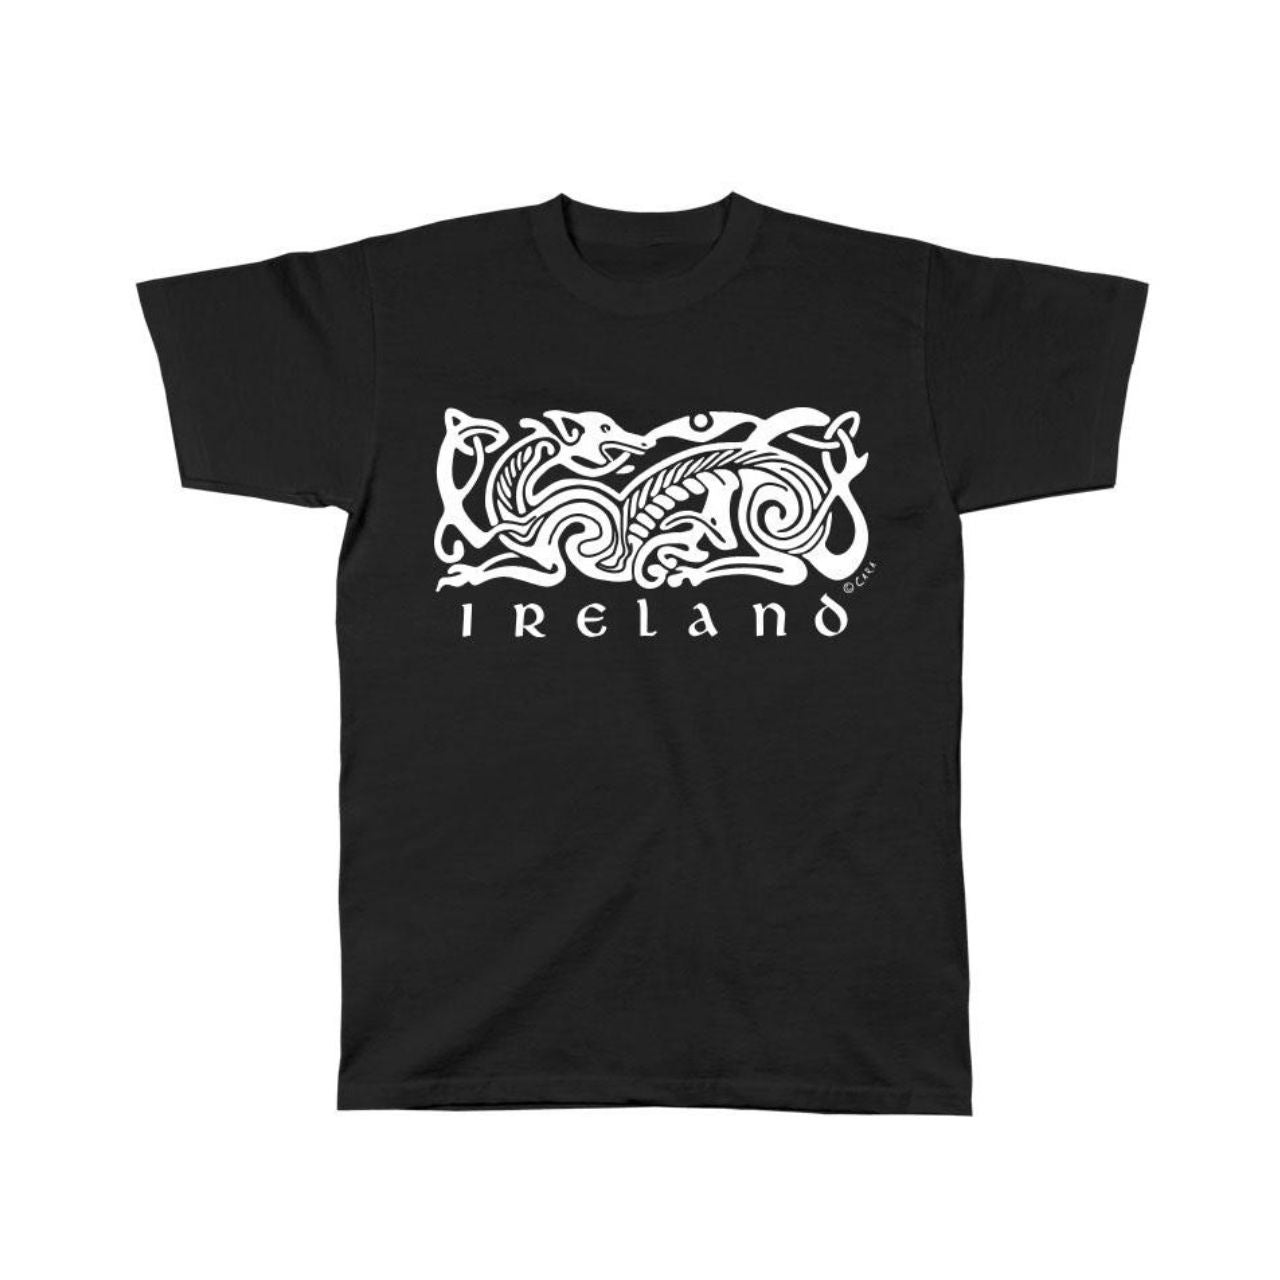 Cara Craft Ireland Celtic Dog T-Shirt Black  - 100% cotton - Ash 99% cotton,1% polyester - Crew Neck - Designed And Printed in Ireland By Cara craft - Machine Washable